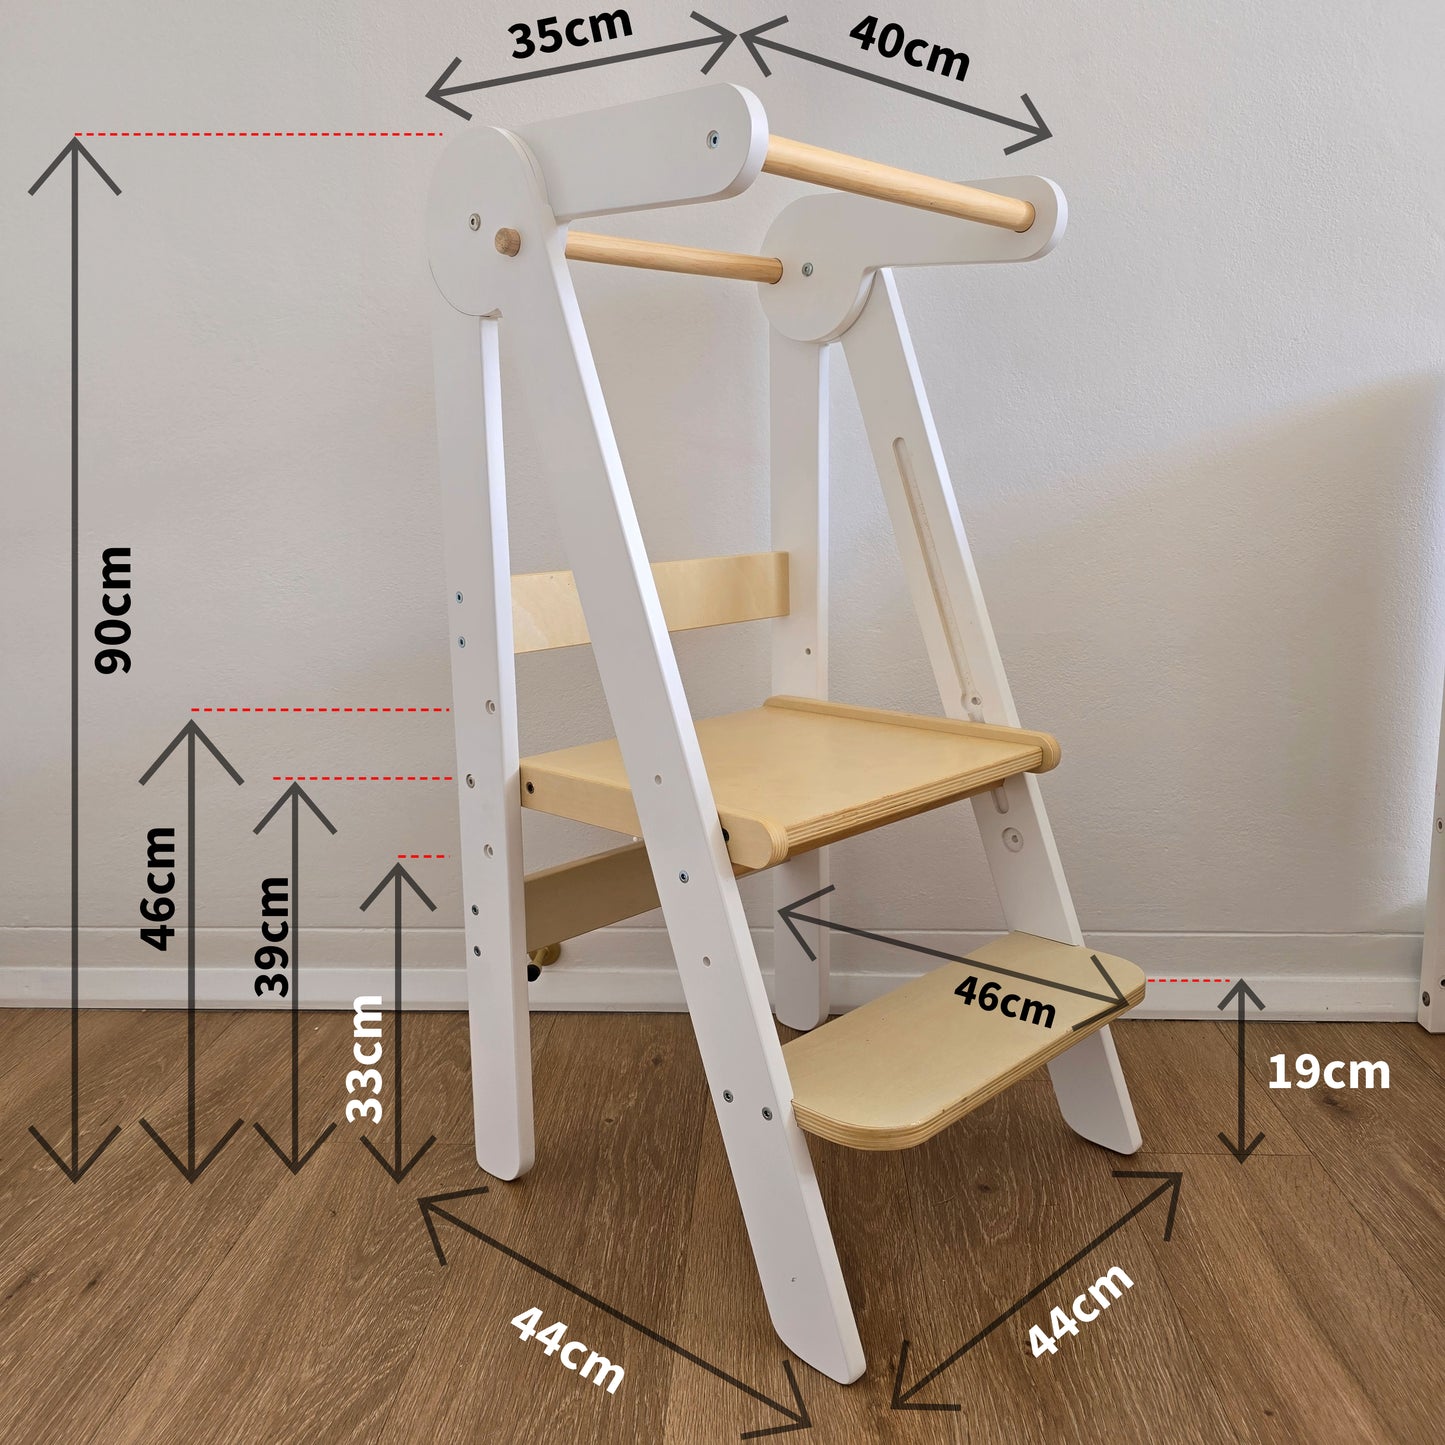 Image displaying all open dimensions of the Four Little Monkeys White Adjustable Foldable Learning Tower, showing height, width and depth measurements.